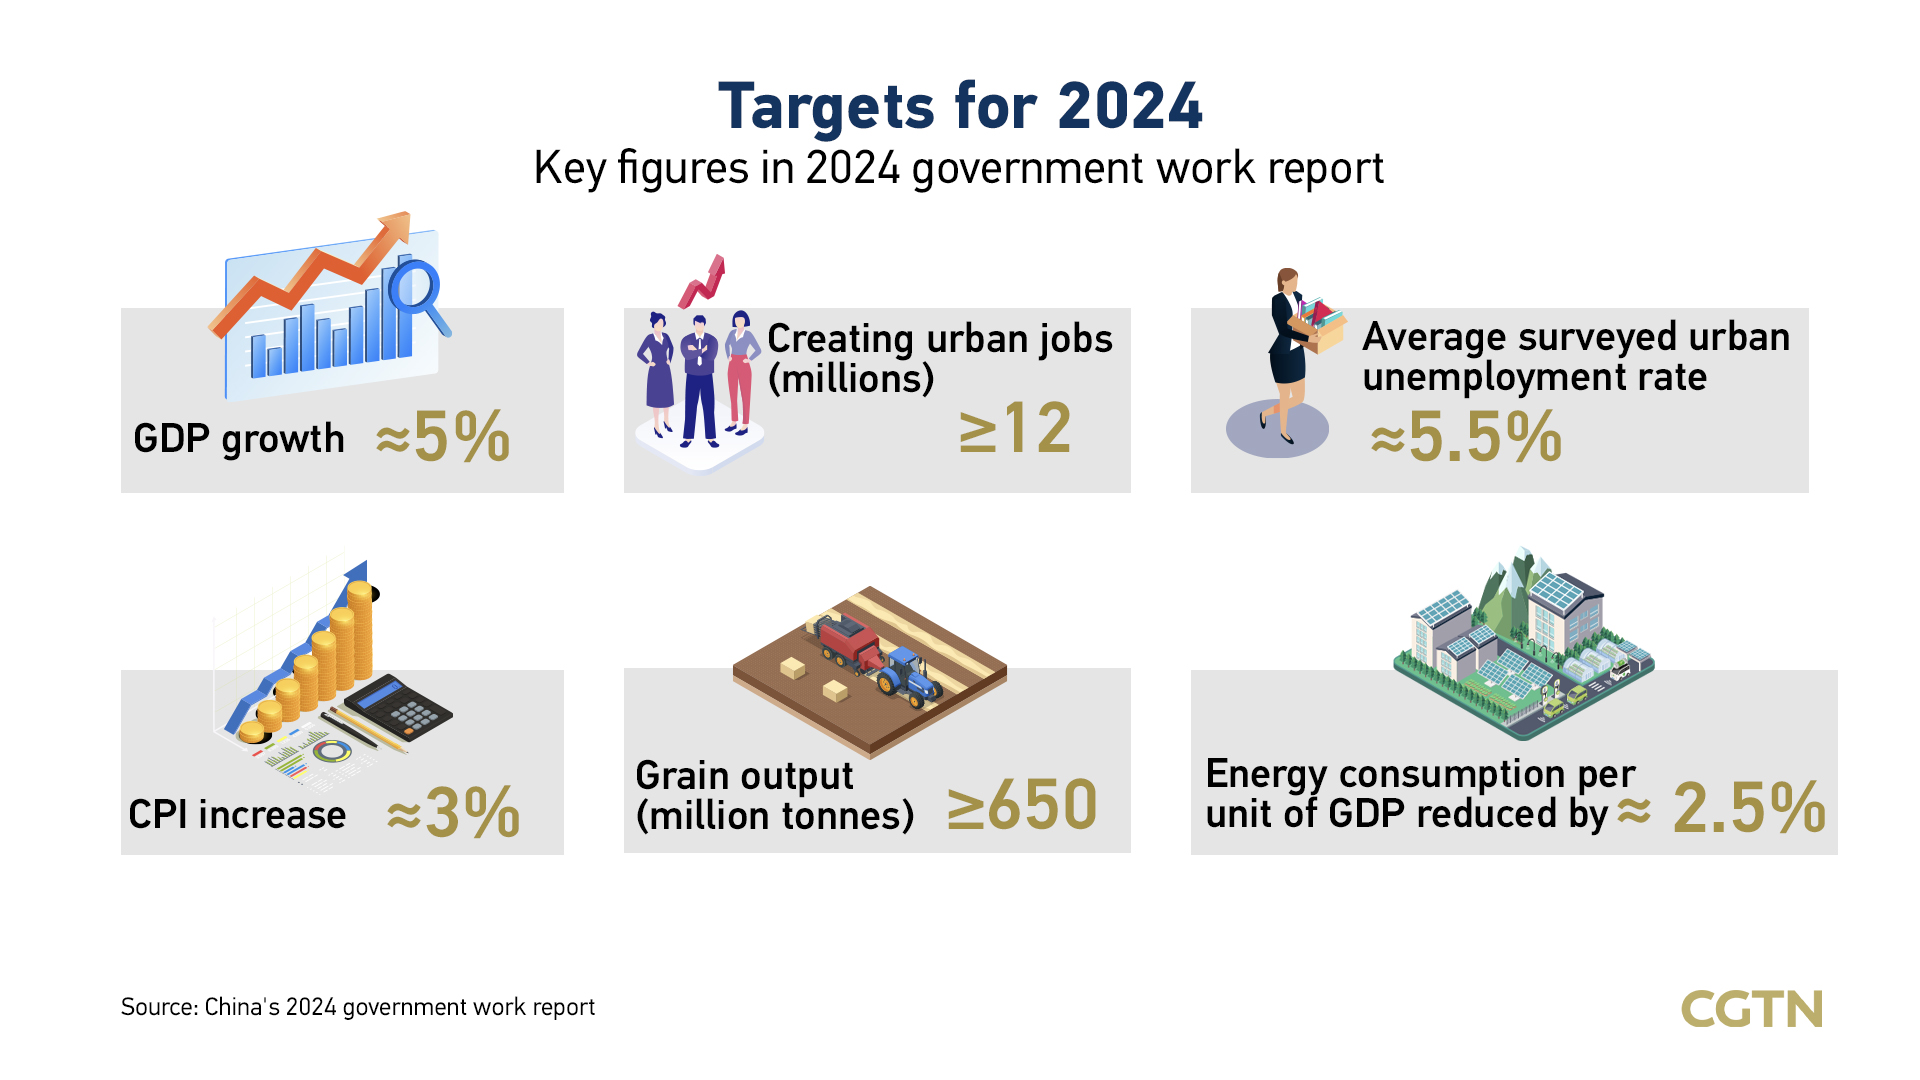 Graphics: Key figures in China's 2024 government work report